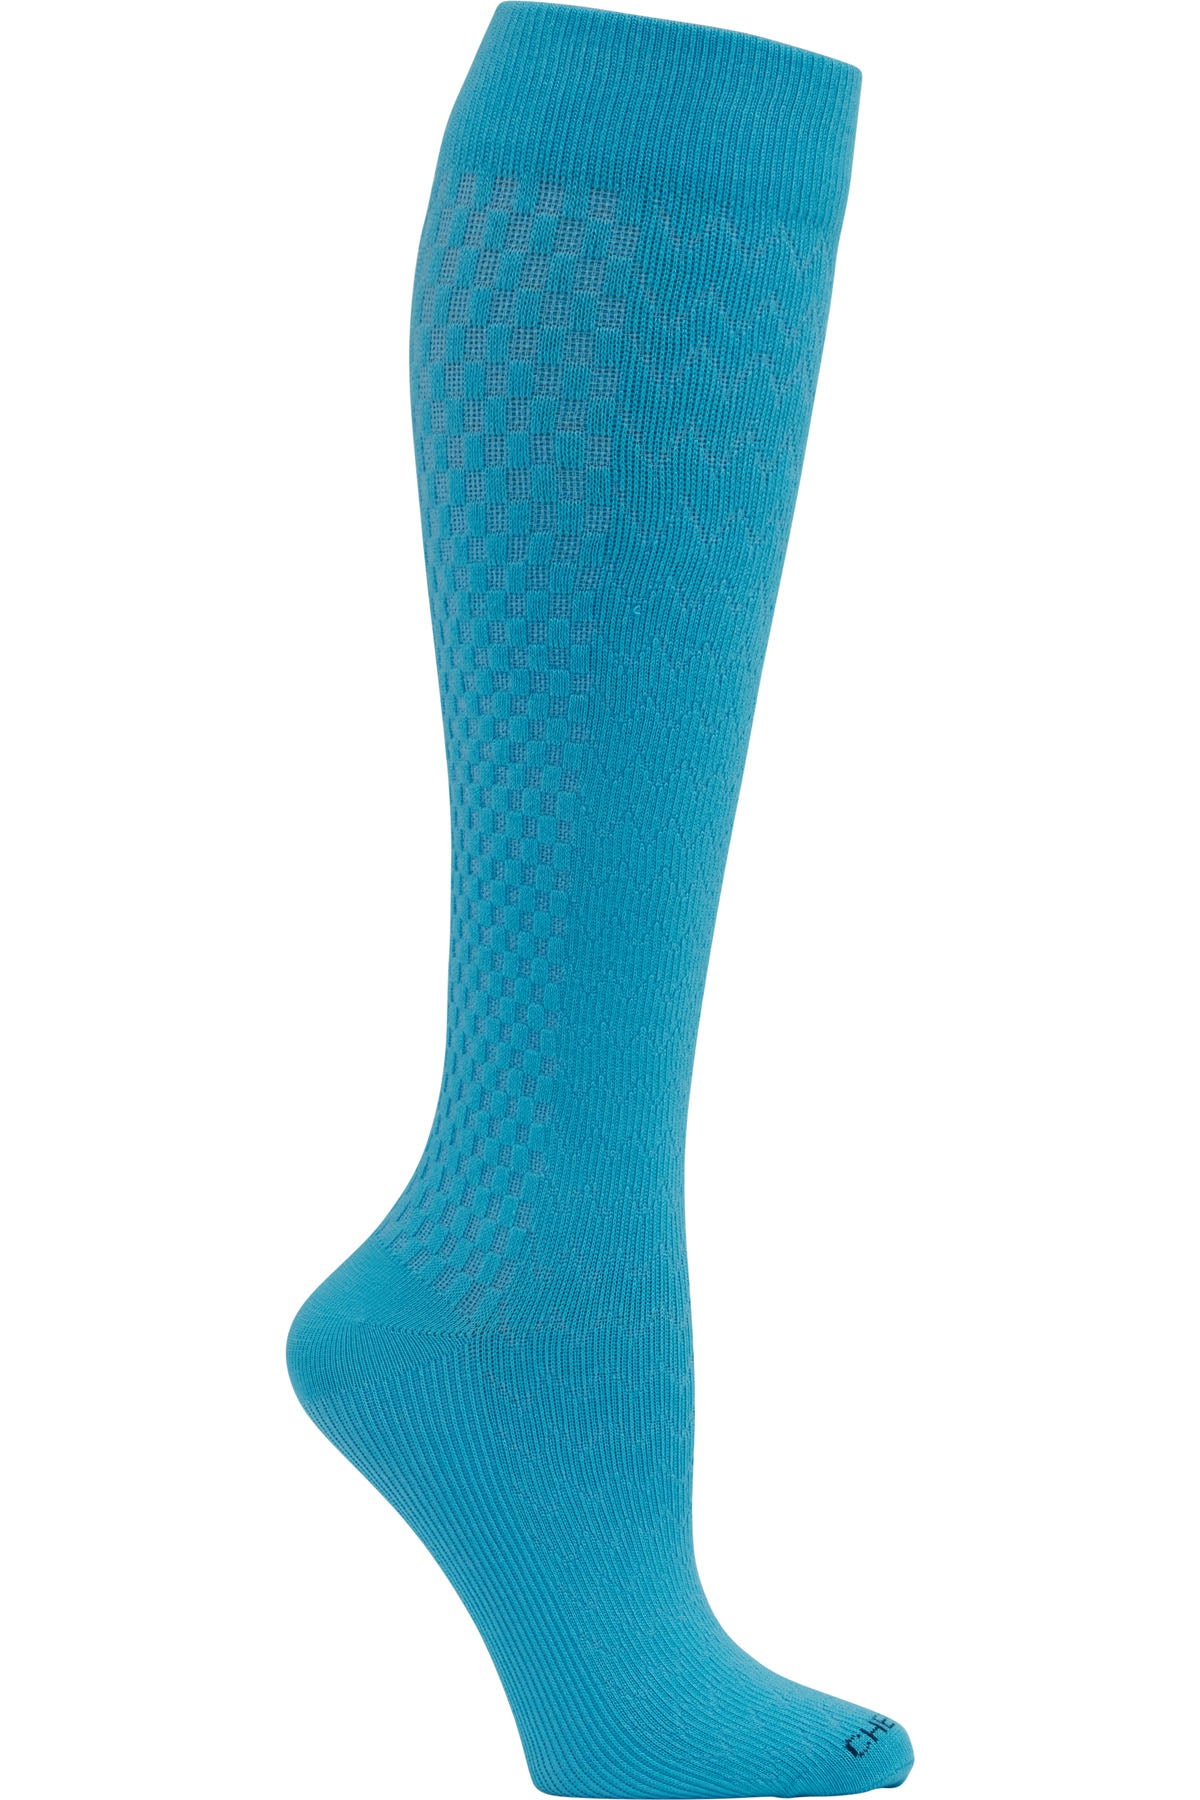 Cherokee Mild Compression Socks True Support 10-15 mmHg in Peacock at Parker's Clothing and Shoes.